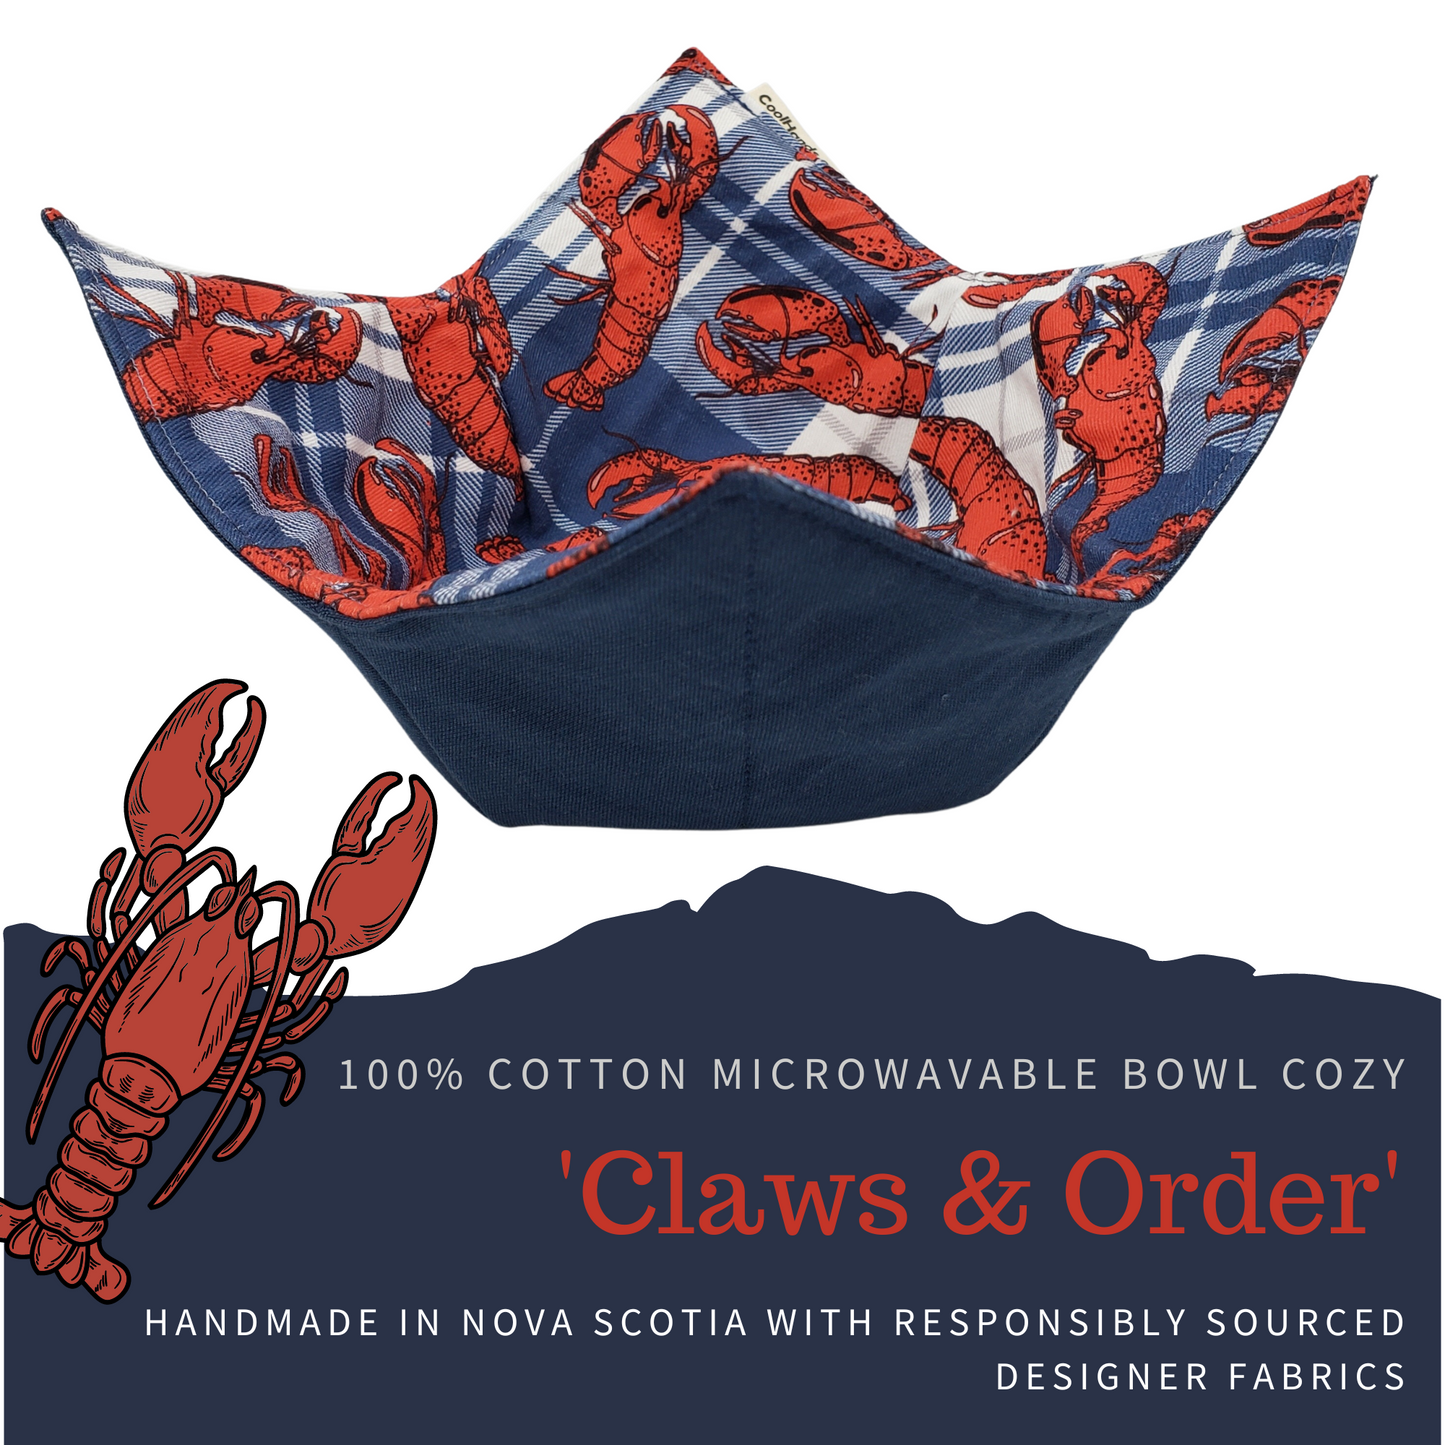 100% Cotton Microwavable Bowl Cozy - "Claws & Order"